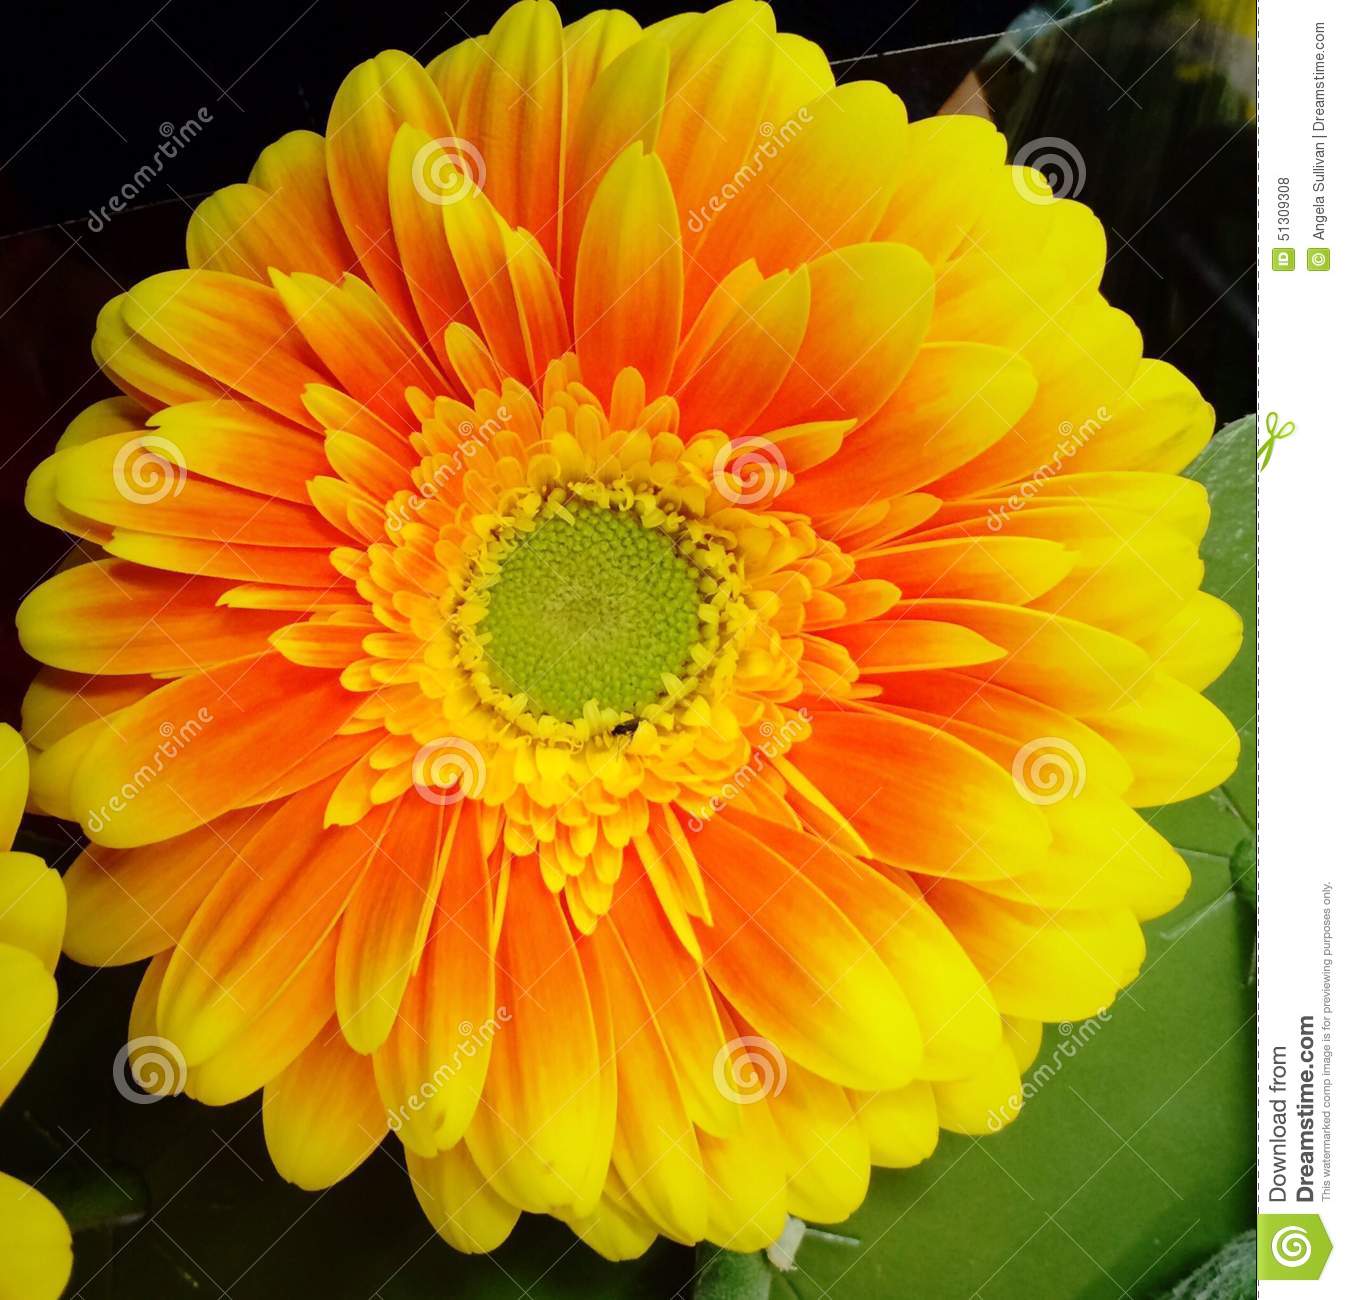 Close Up Of A Bright And Colorful Orange And Yellow Gerbera Daisy